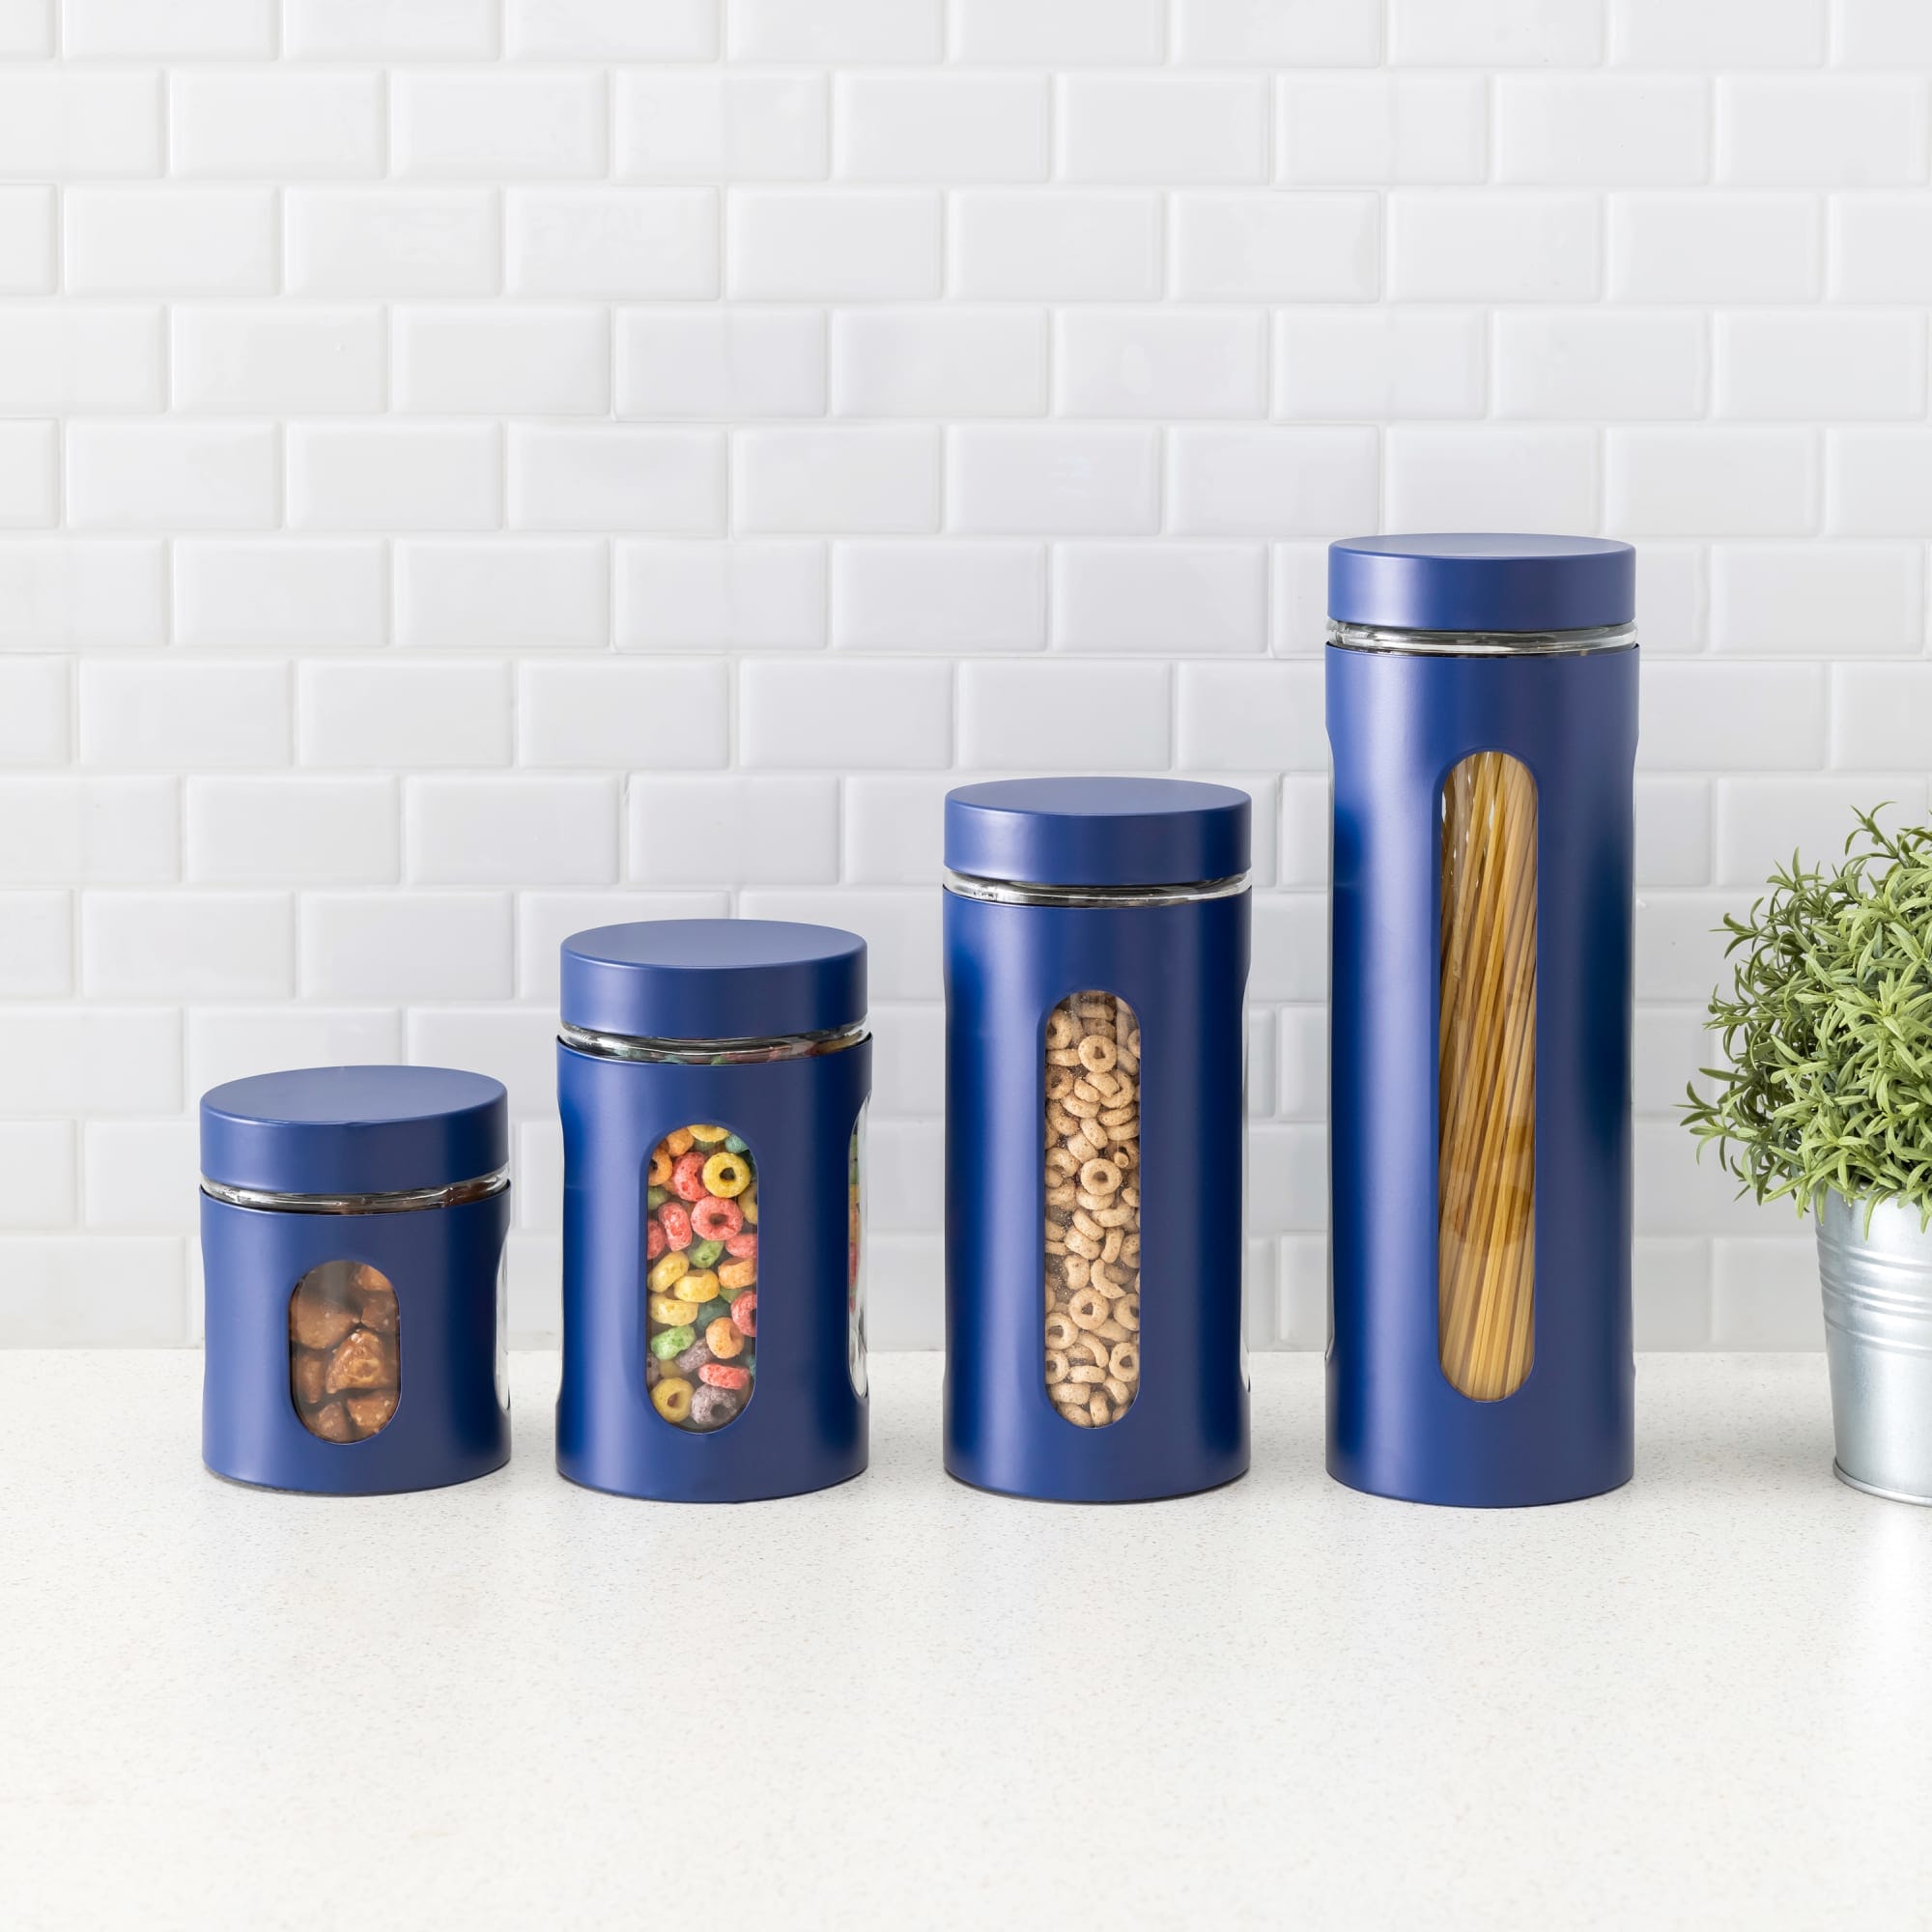 Home Basics 4 Piece Metal Canisters with Multiple Peek-Through Windows, Navy $15.00 EACH, CASE PACK OF 4